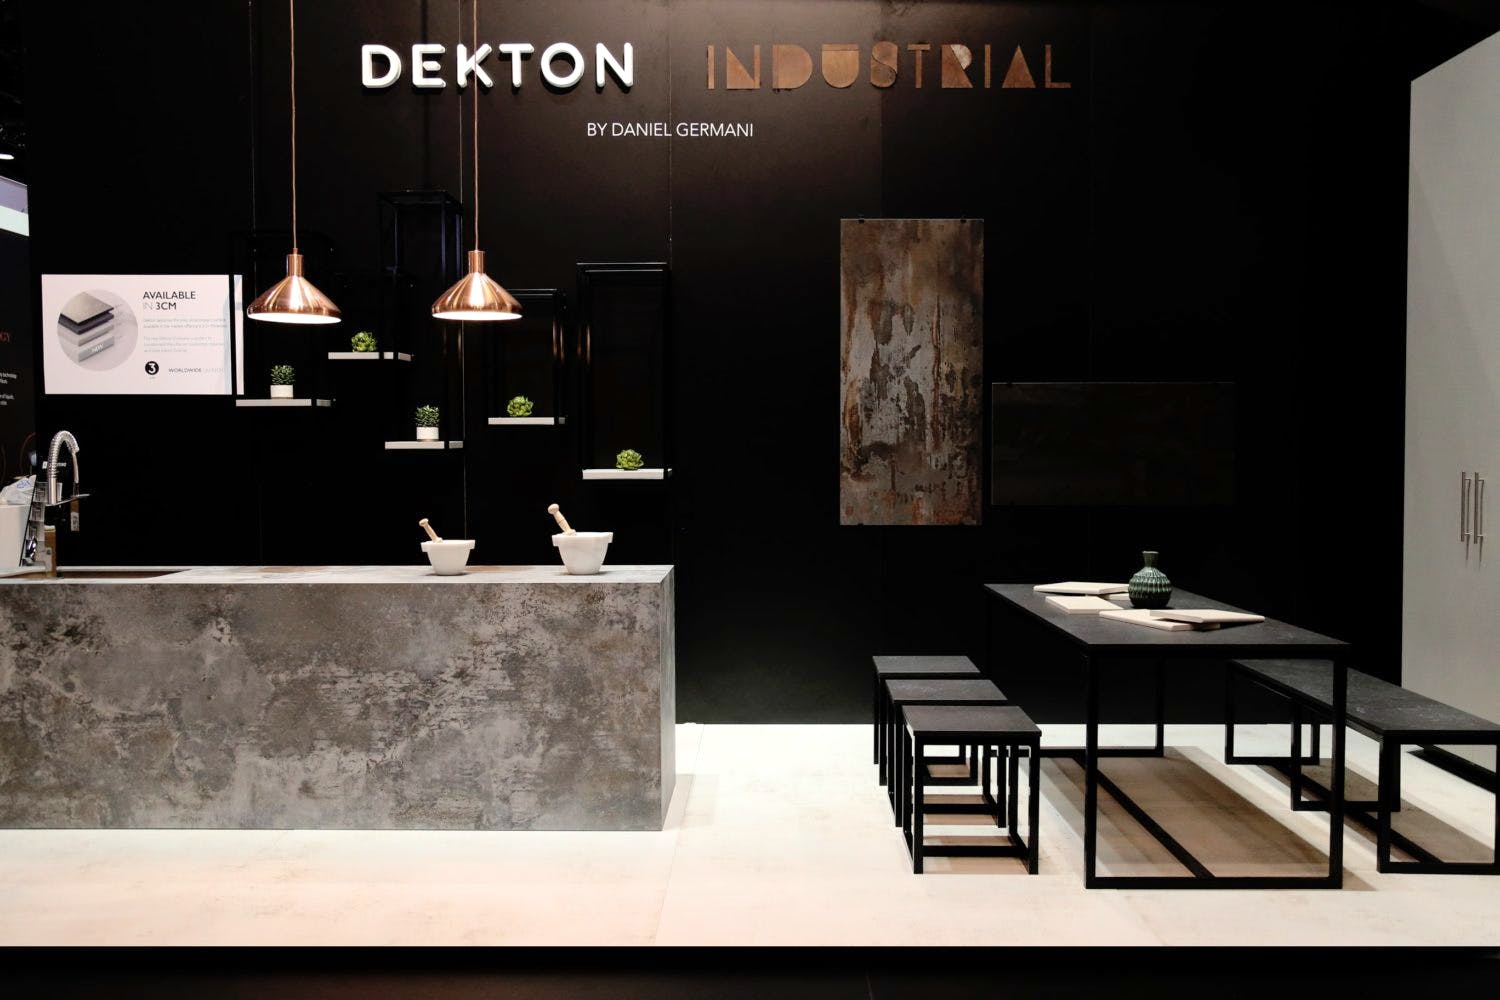 Image of Dekton Industrial Stand Cosentino KBIS 2018 lr 1500x1000 6 in The Cosentino Design Challenge has now reached its 12th year - Cosentino